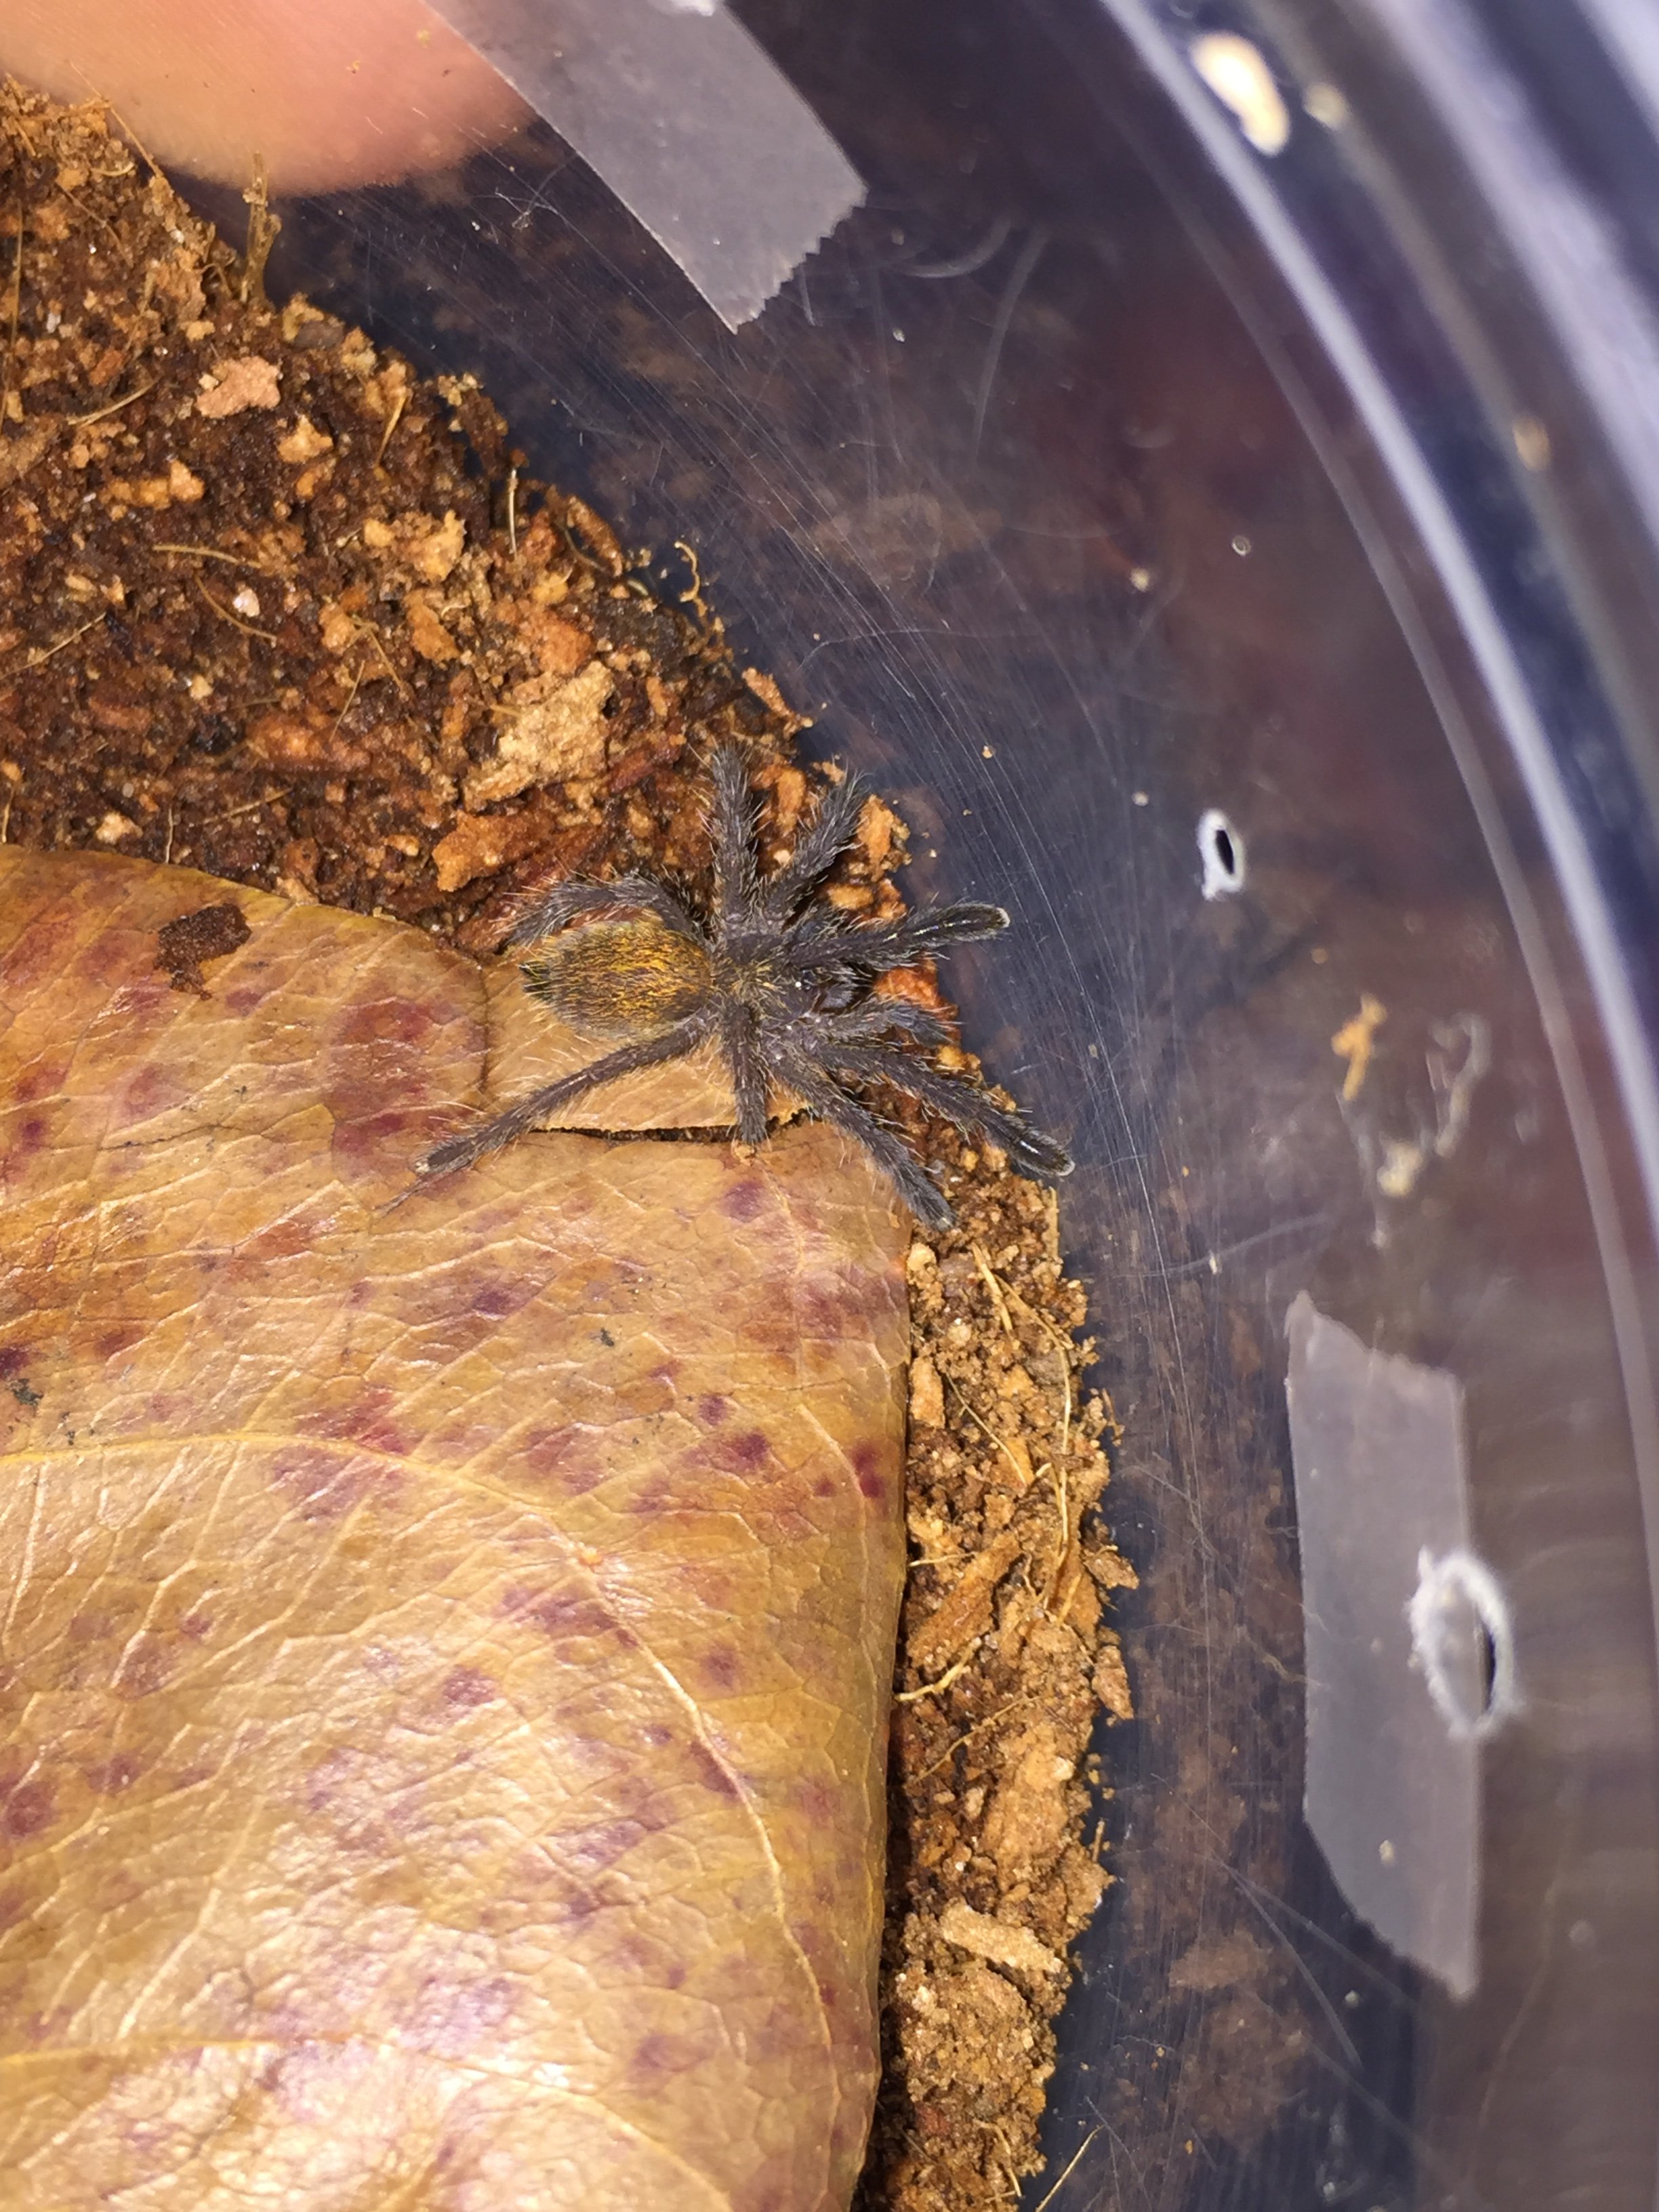 My new OBT sling